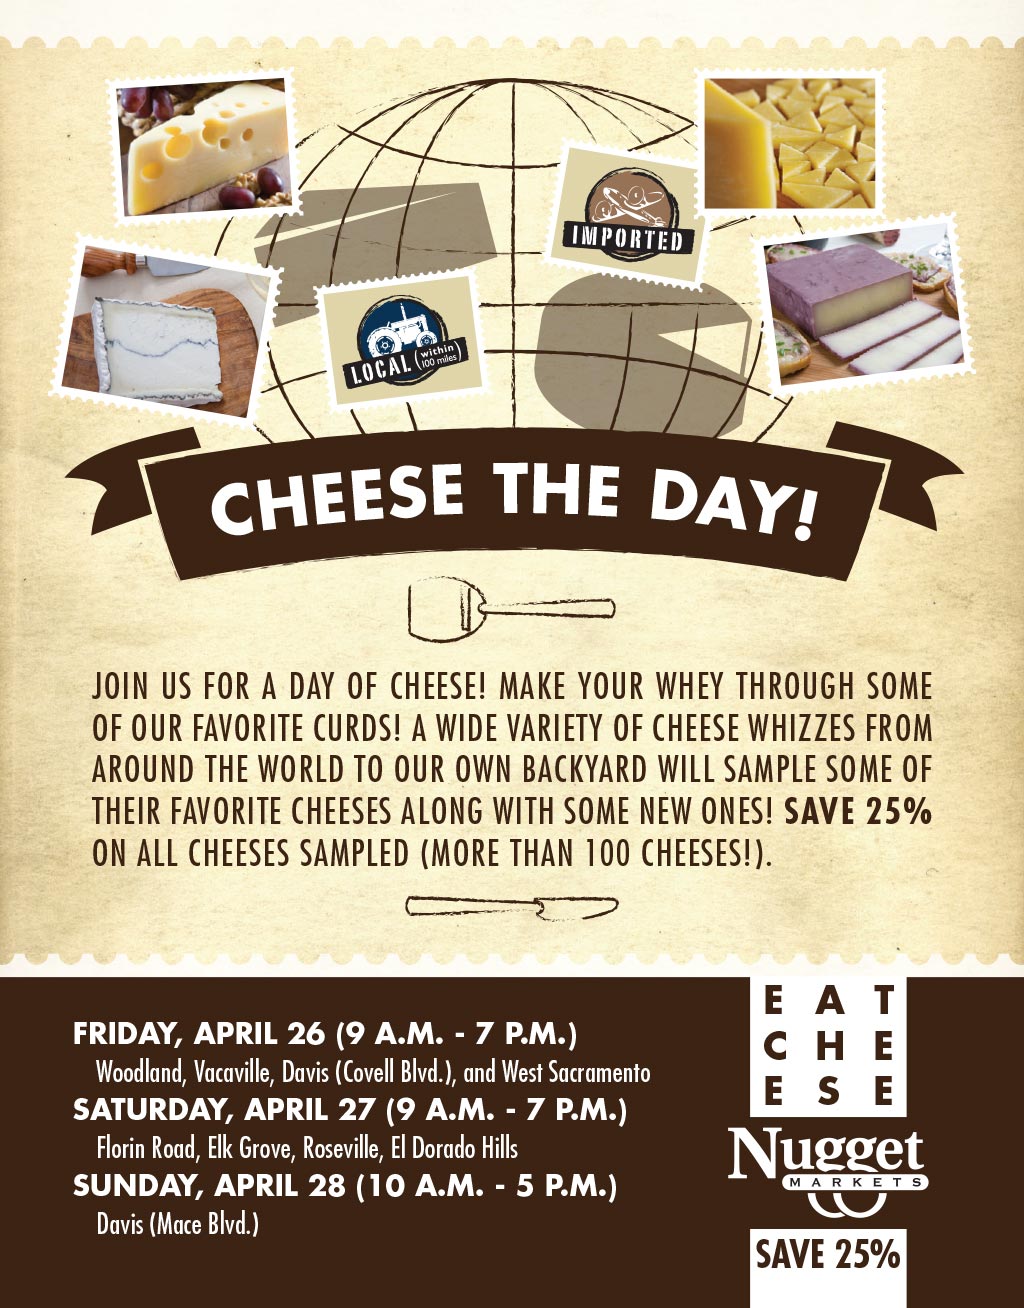 Nugget Markets Cheese The Day 2013 Flyer